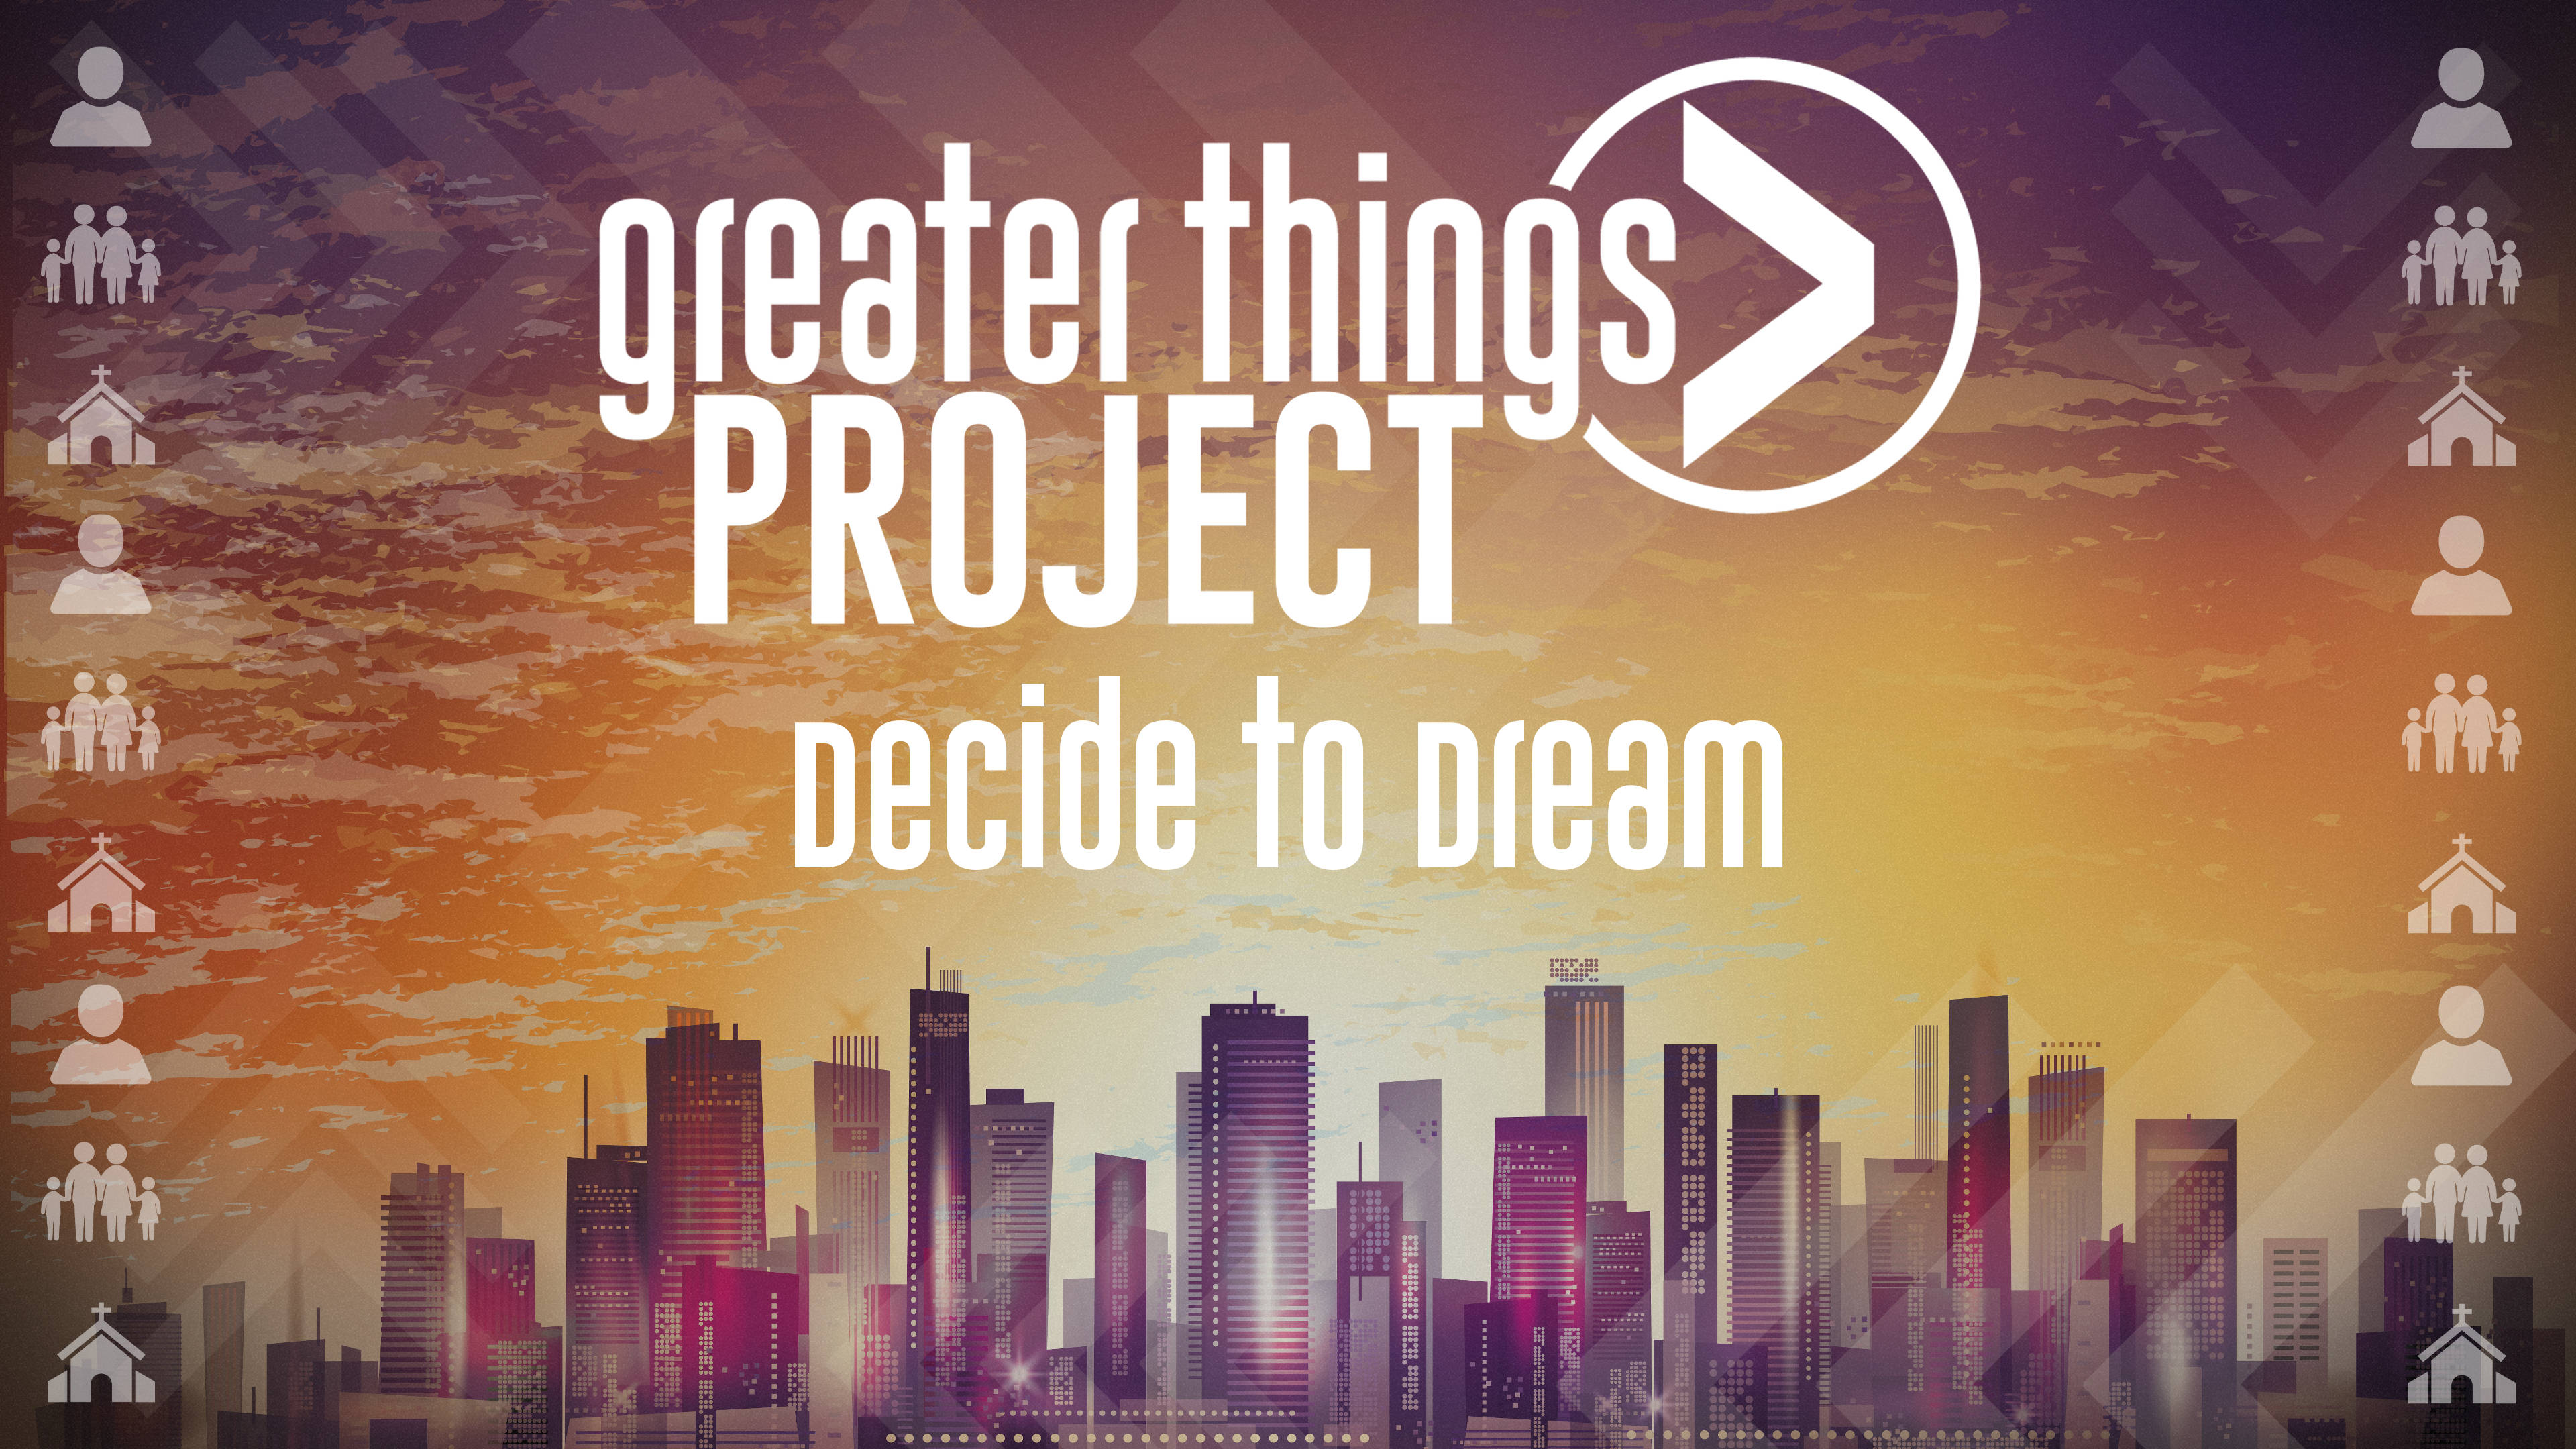 Greater Things Project | Decide to Dream